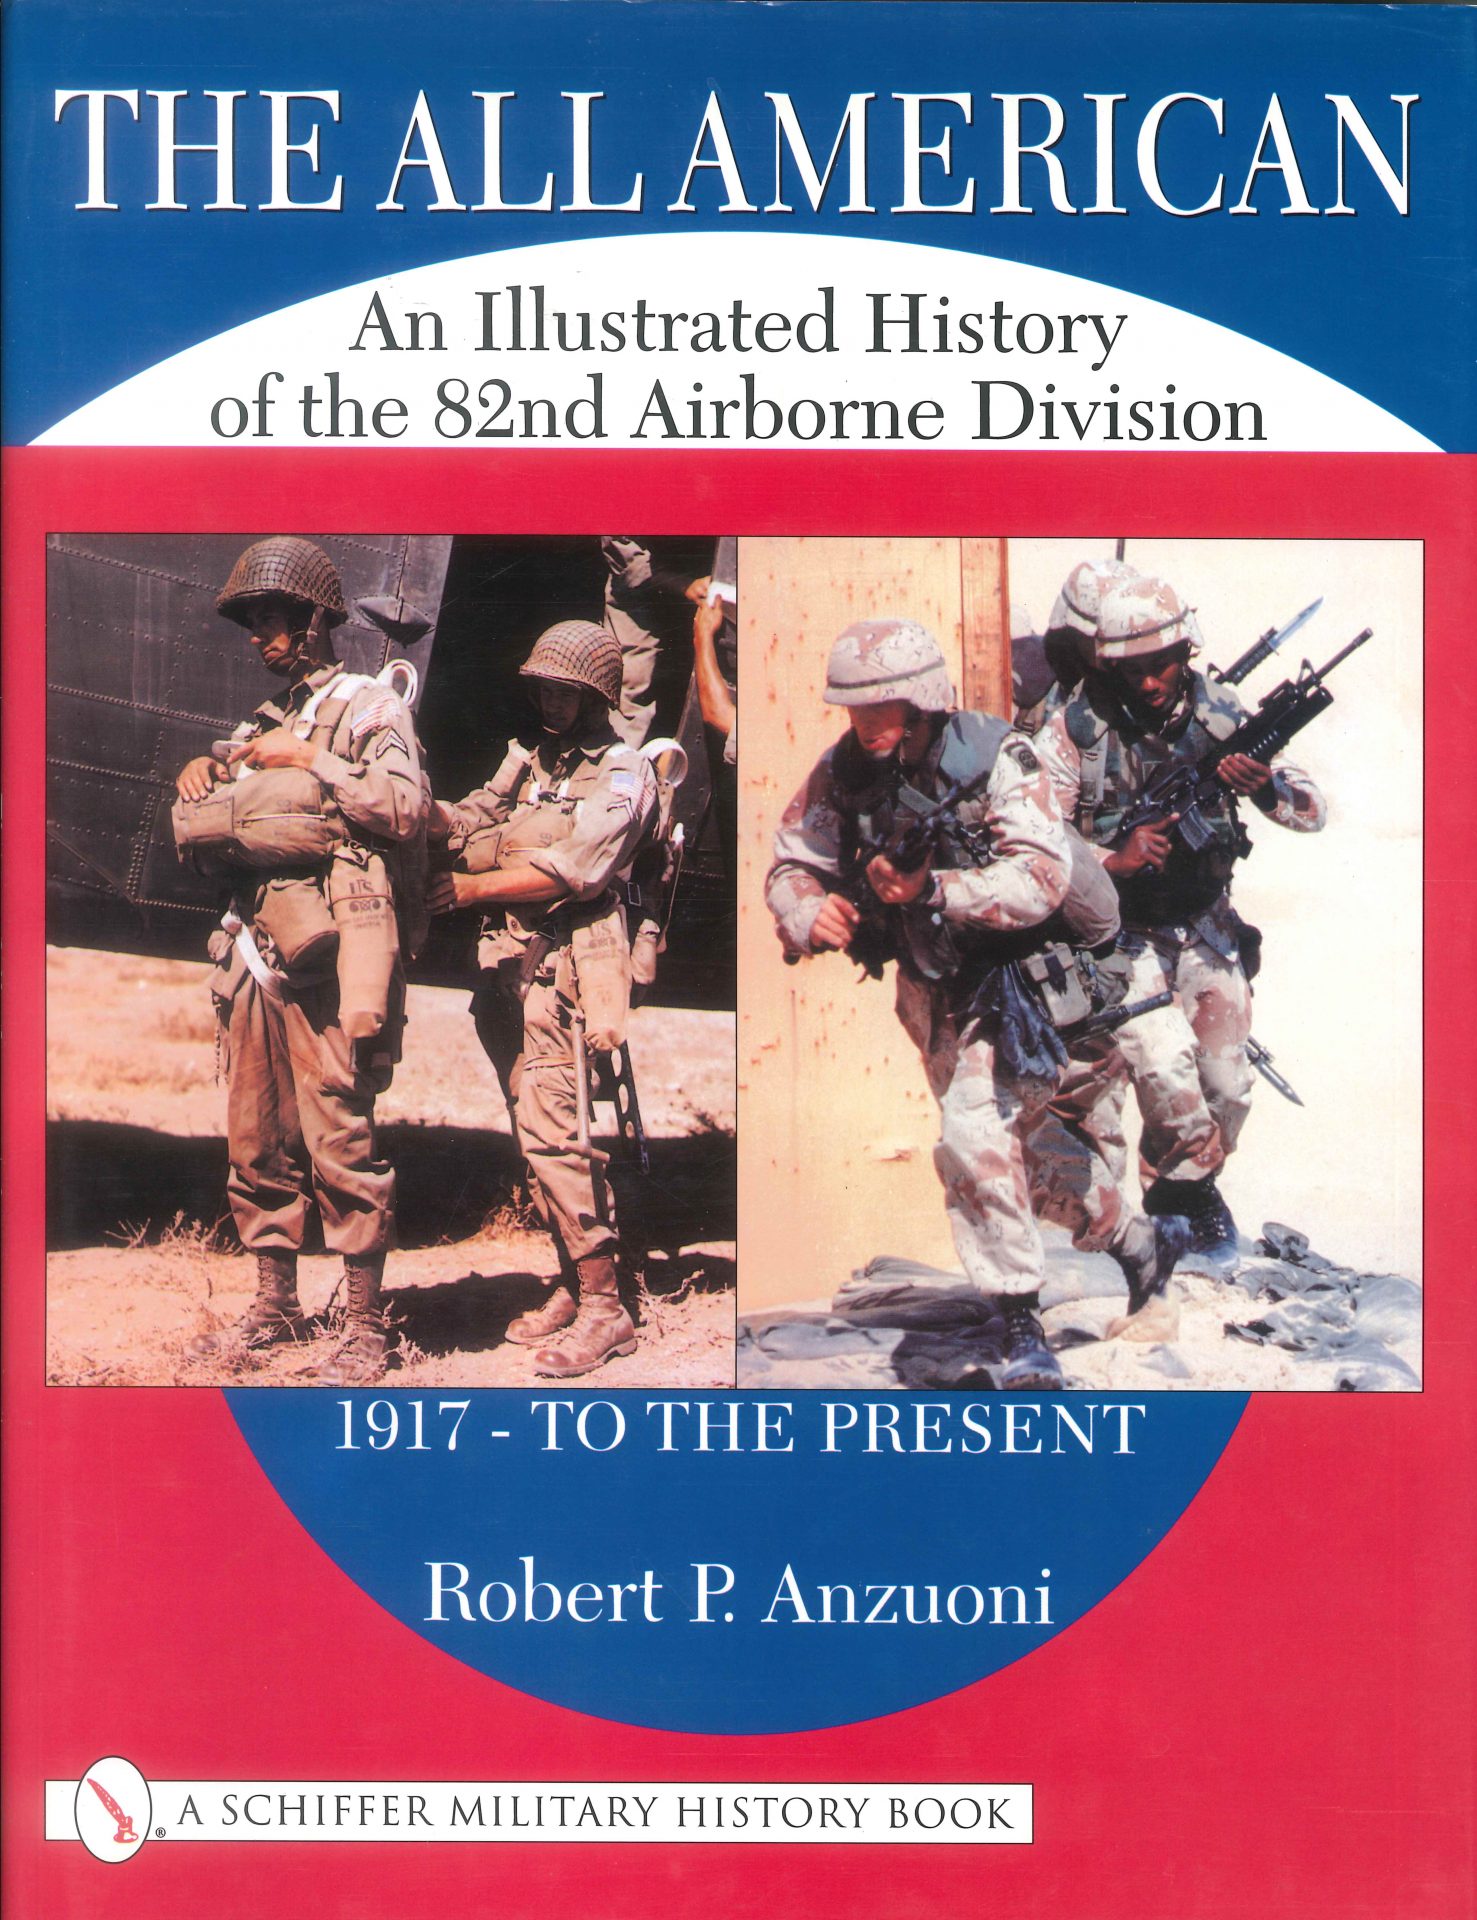 THE ALL AMERICAN History of the 82nd Airborne Division Military Classic Memorabilia